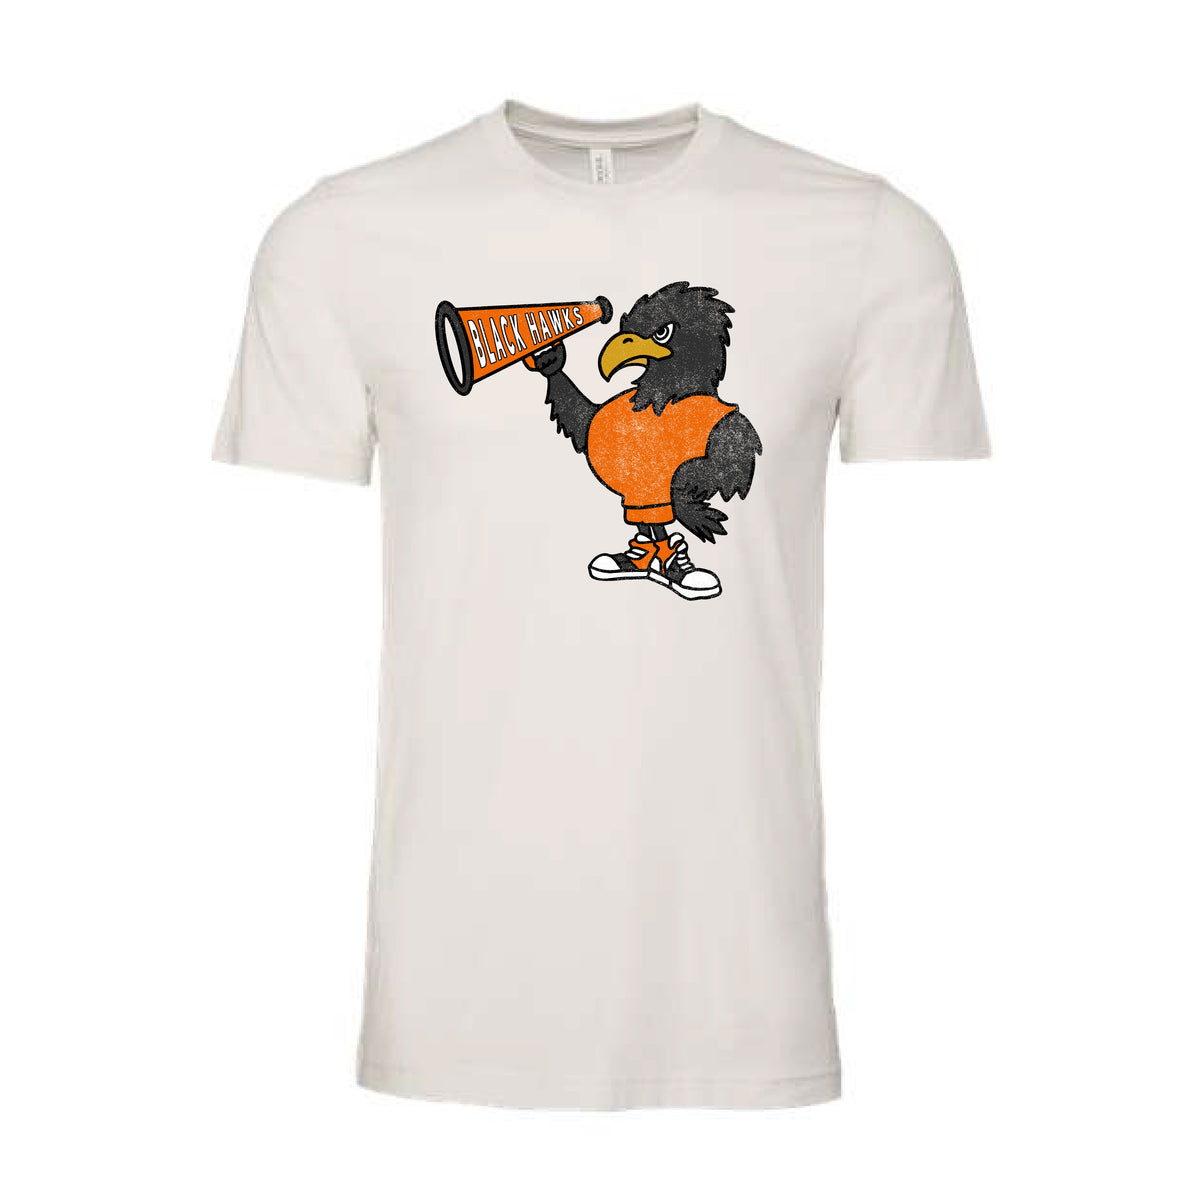 White graphic T-shirt featuring cartoon crow holding bullhorn that says "Black Hawks"